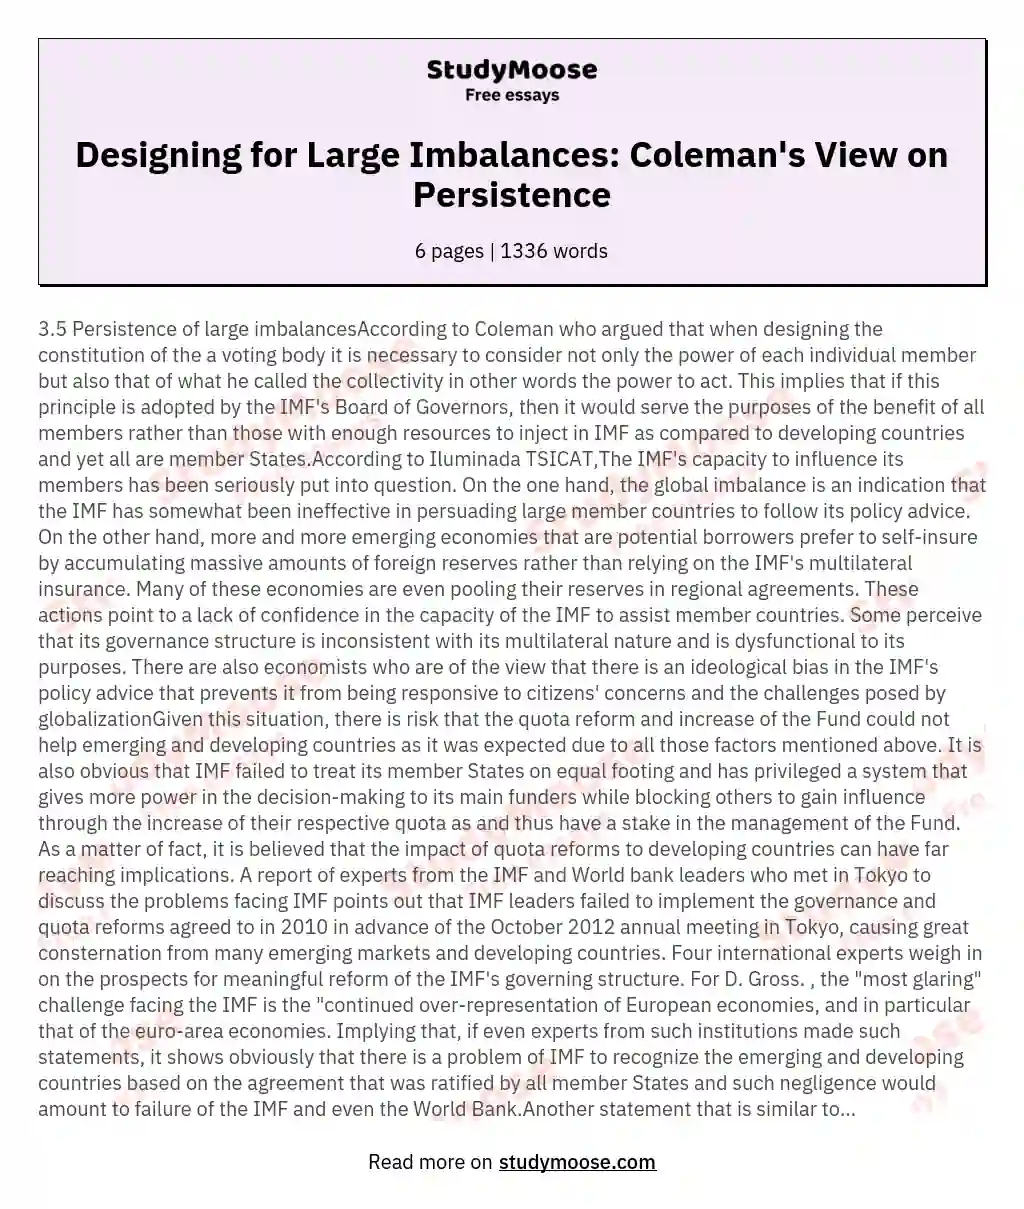 Designing for Large Imbalances: Coleman's View on Persistence essay